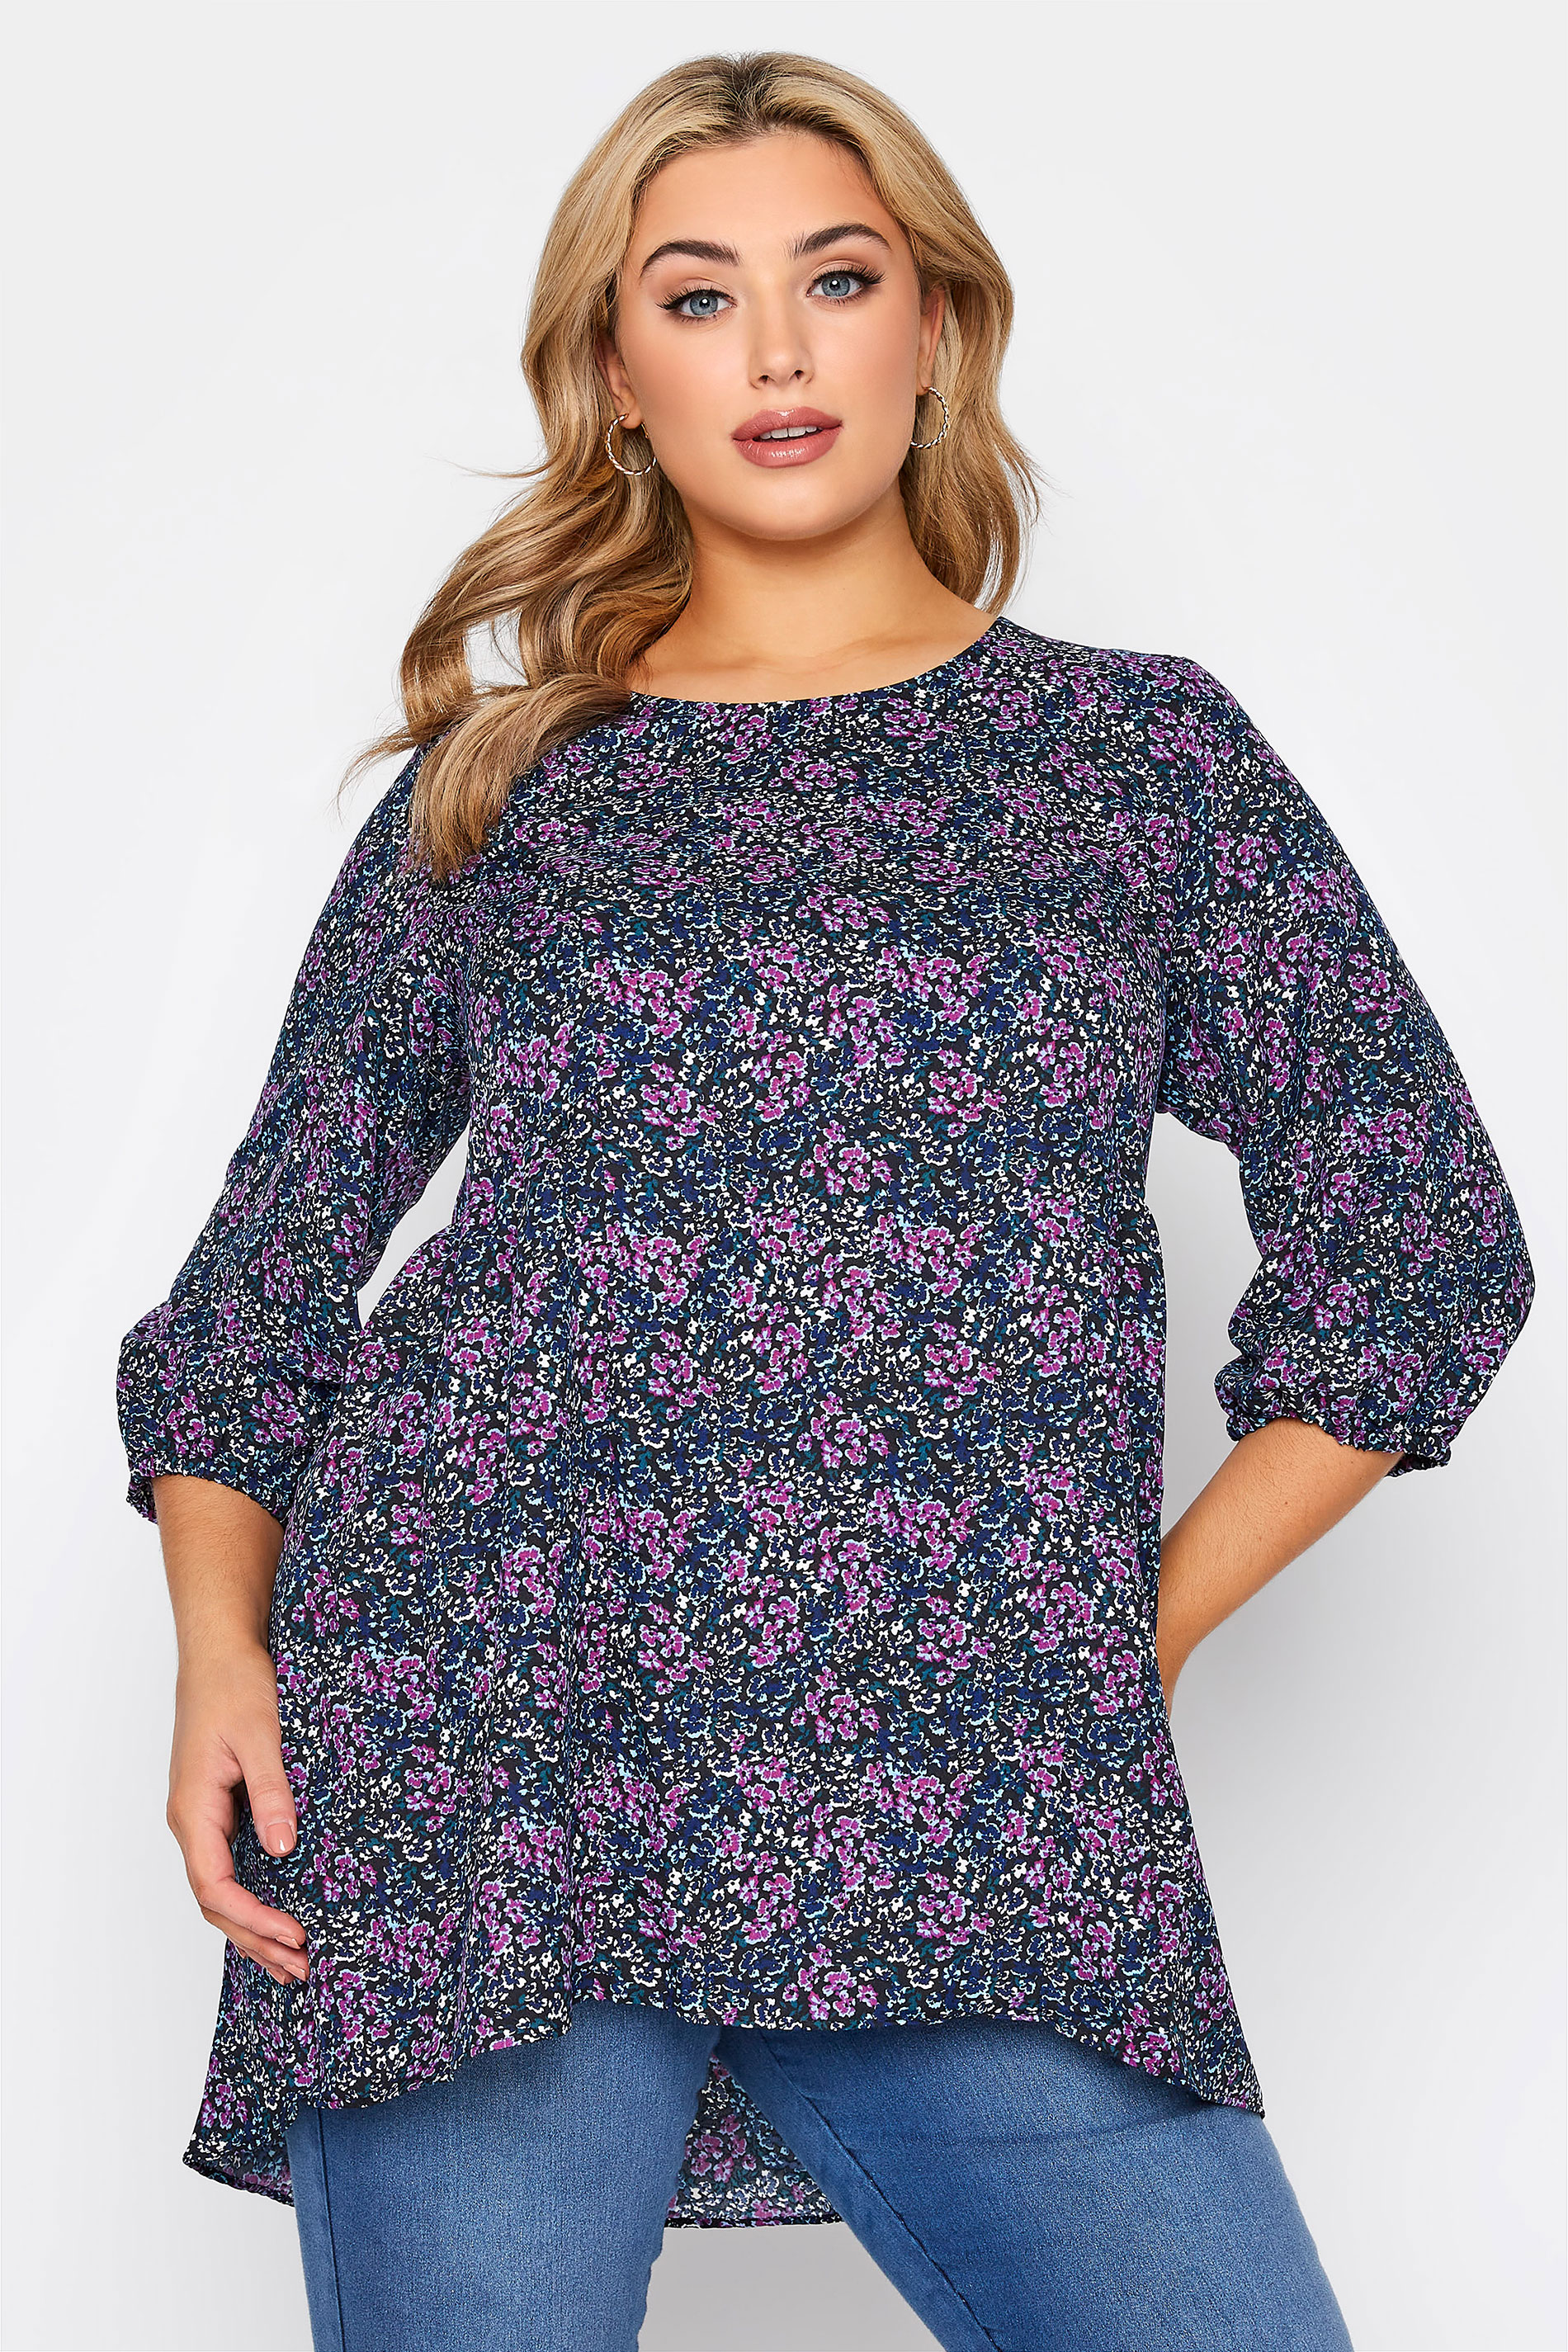 LIMITED COLLECTION Plus Size Black & Blue Ditsy Print Top | Yours Clothing 1